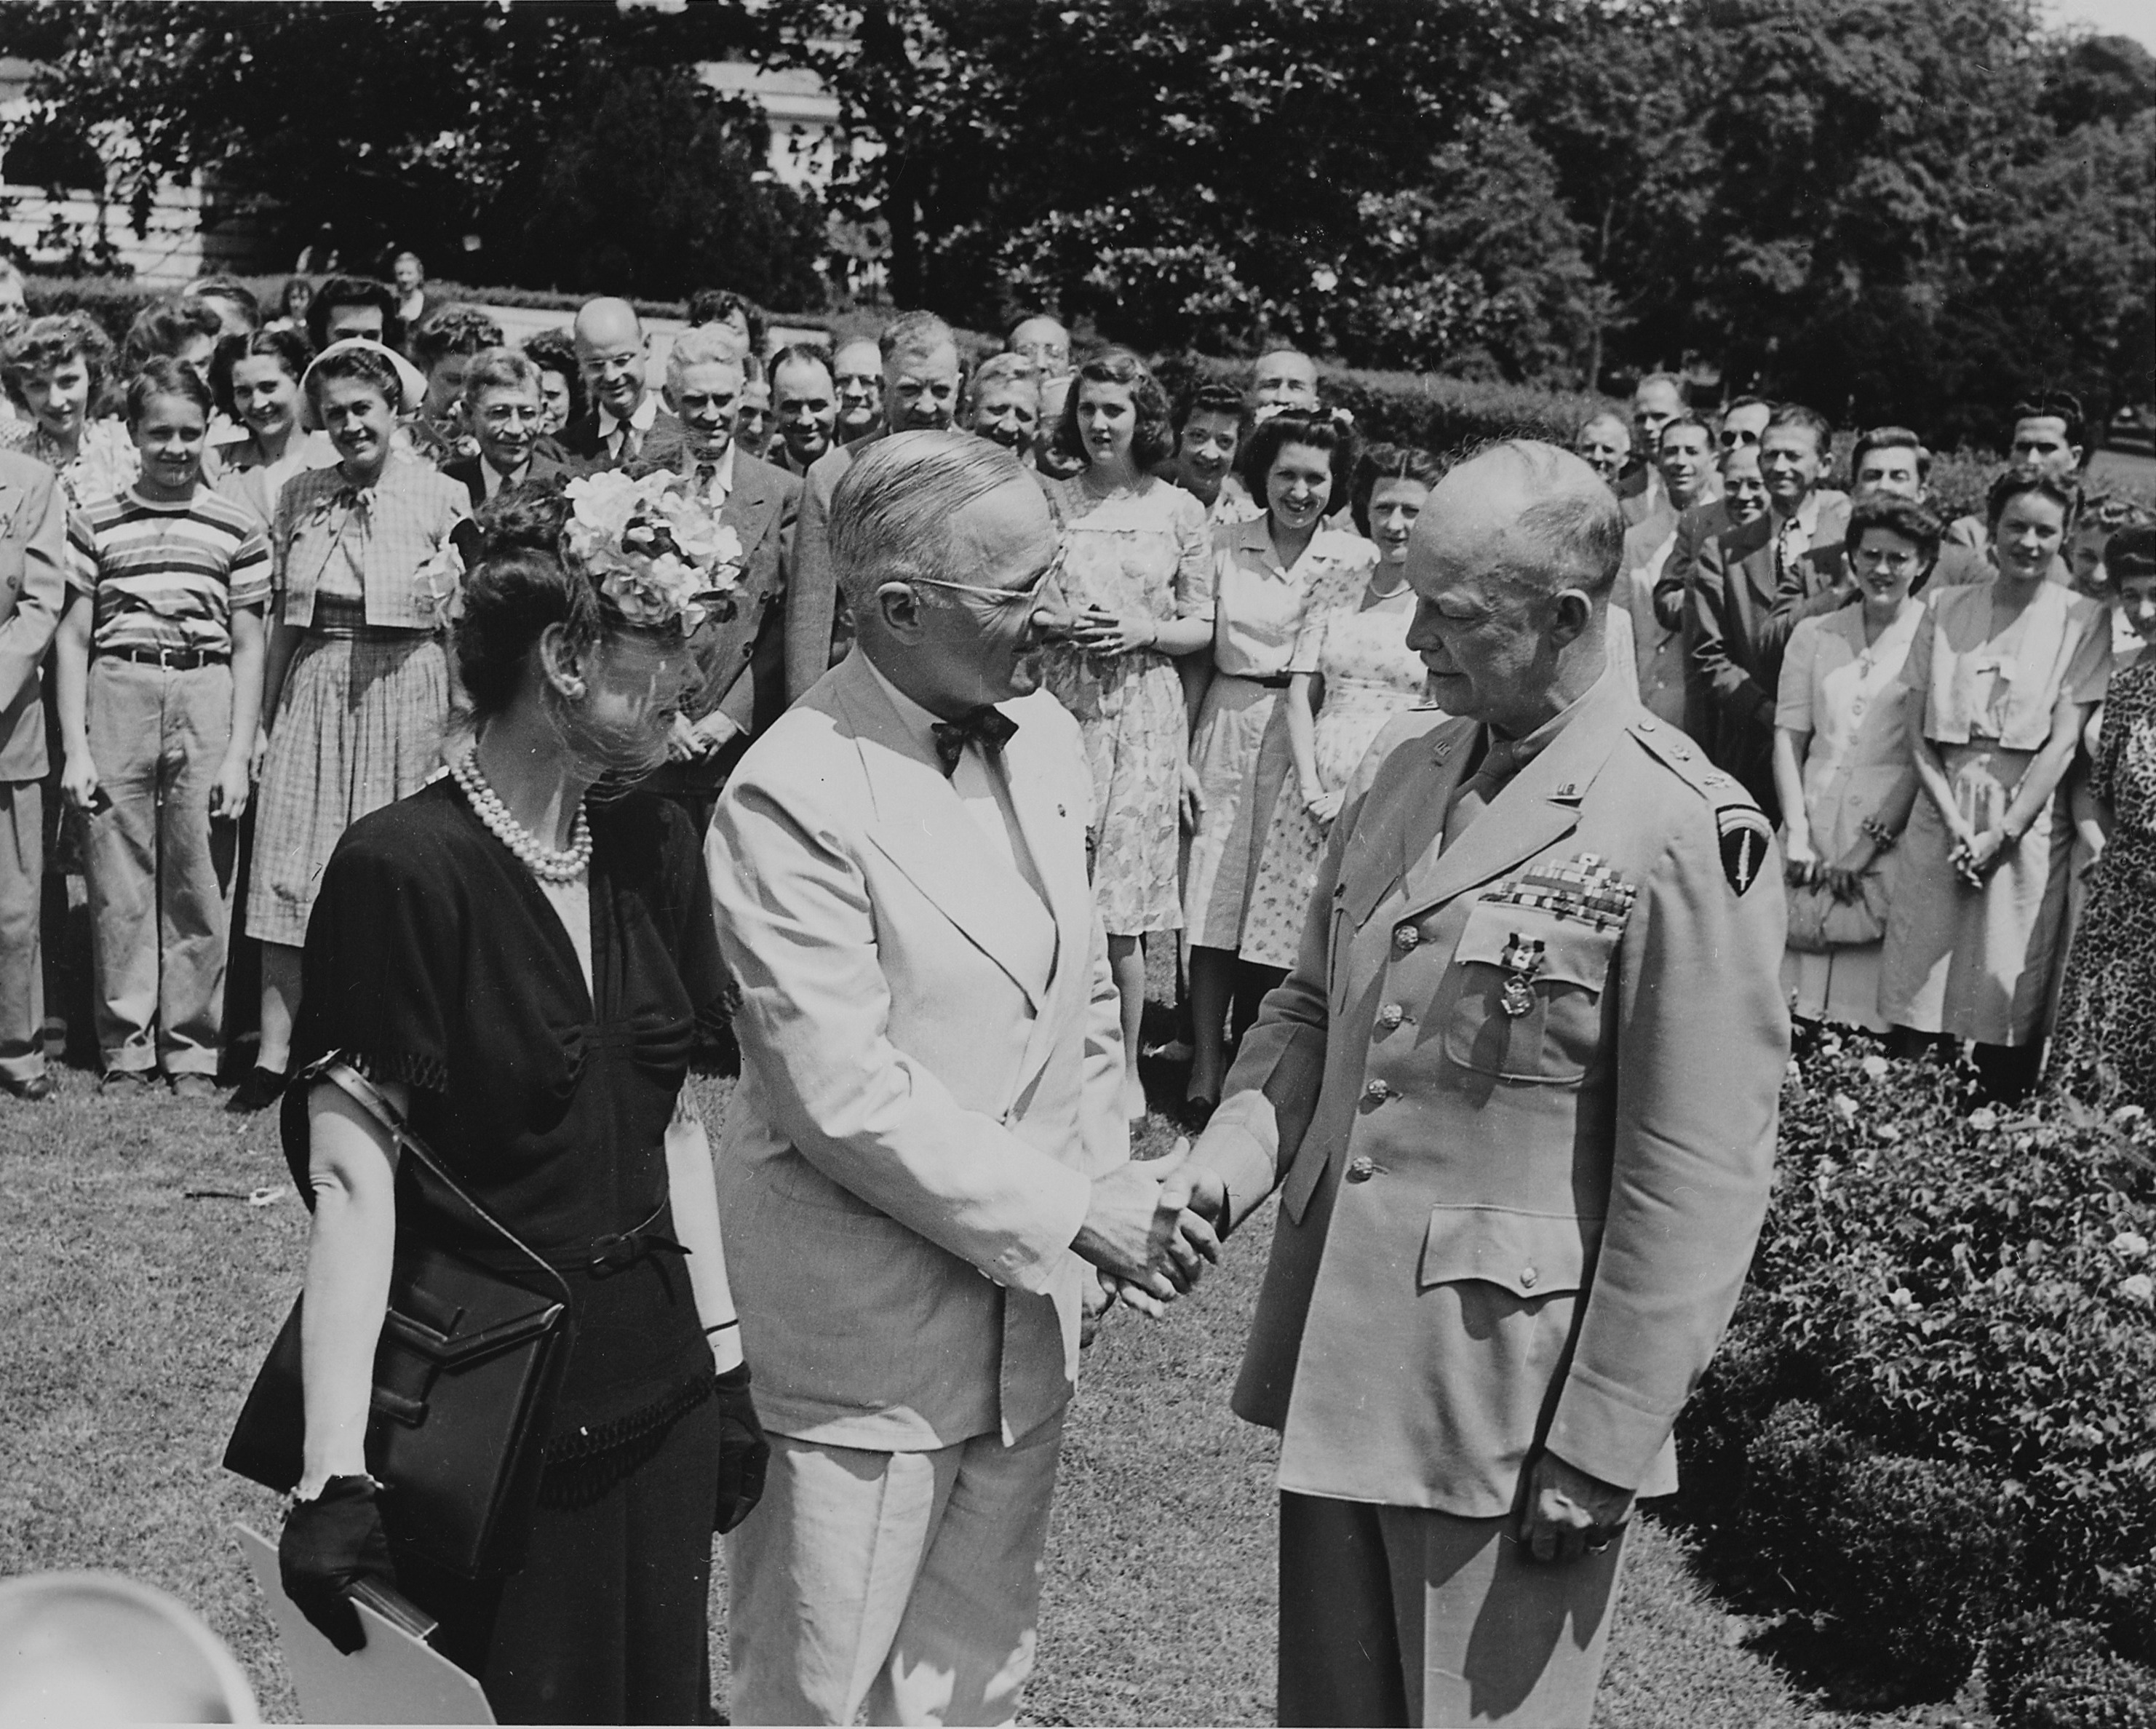 US President Harry Truman decorating General Dwight Eisenhower with the Distinguished Service Medal, Washington DC, United States, 18 Jun 1945, photo 6 of 6